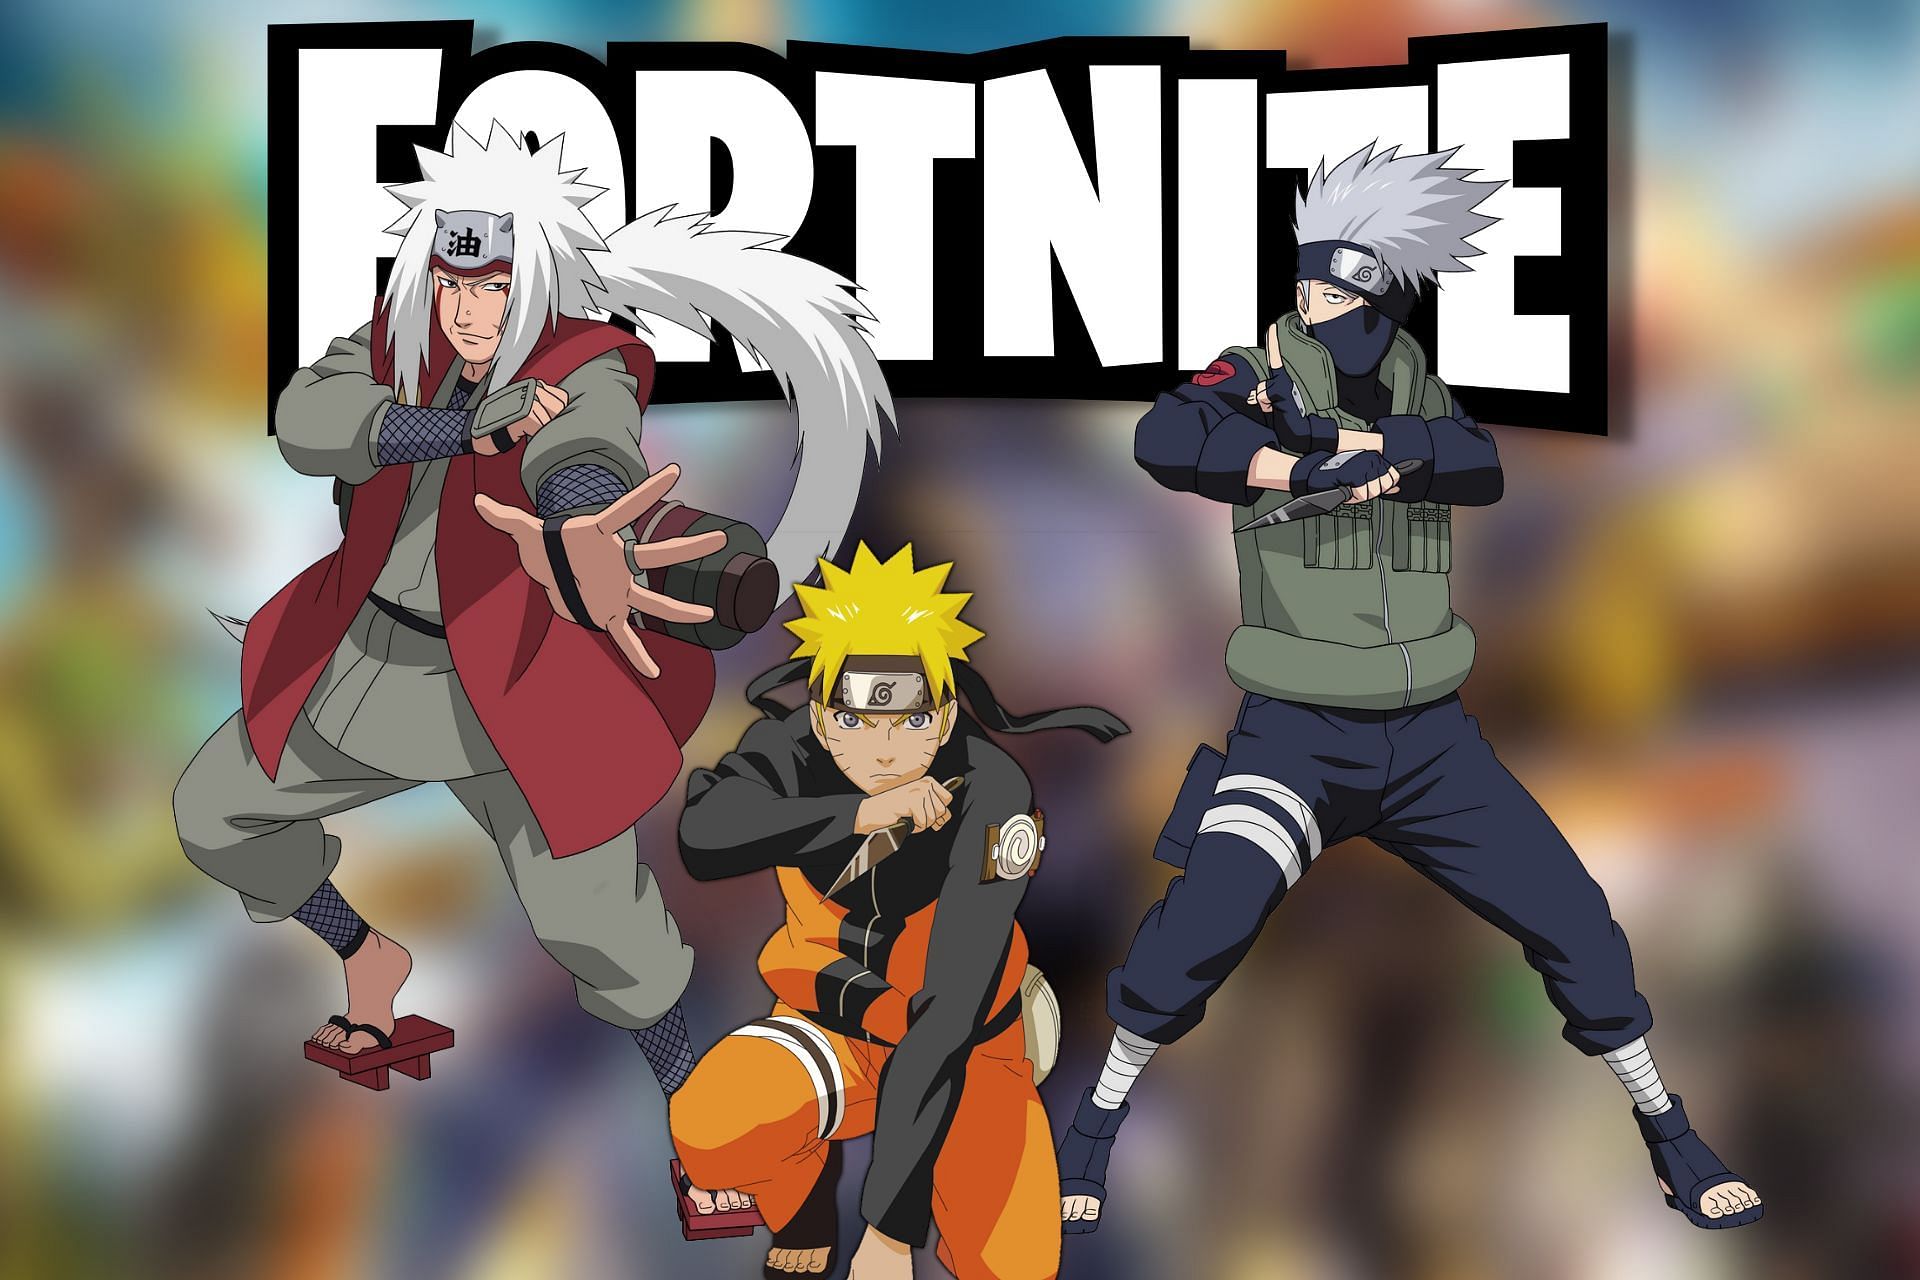 More Naruto skins might come to Fortnite in Chapter 3 (Image via Sportskeeda)